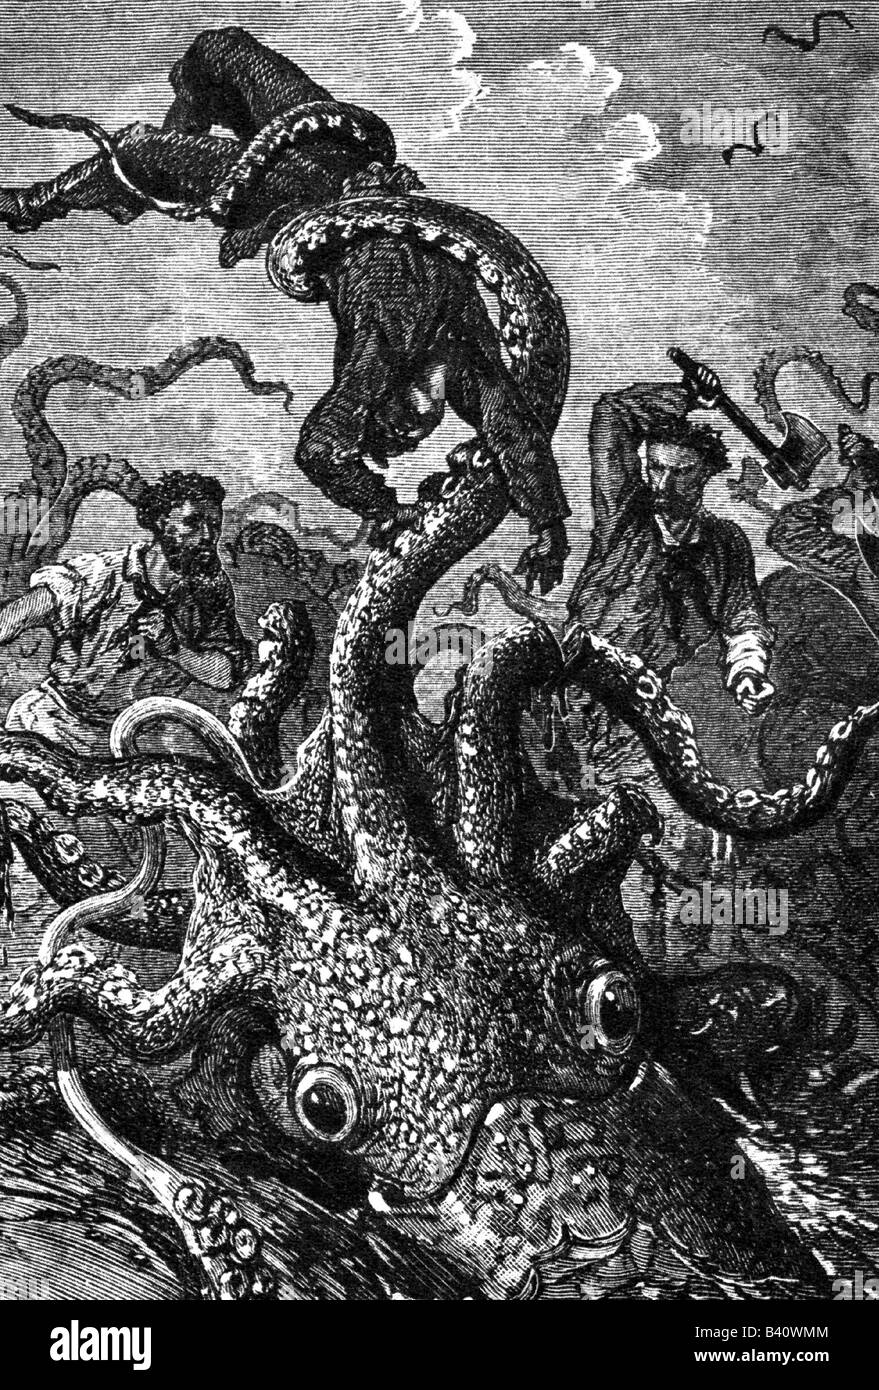 Verne, Jules, 8.2.1828 - 24.3.1905, French author / writer, work, 'Twenty Thousand Leagues Under the Sea', 1870, illustration, Fighting a giant squid, wood engraving, 19th century, , Stock Photo